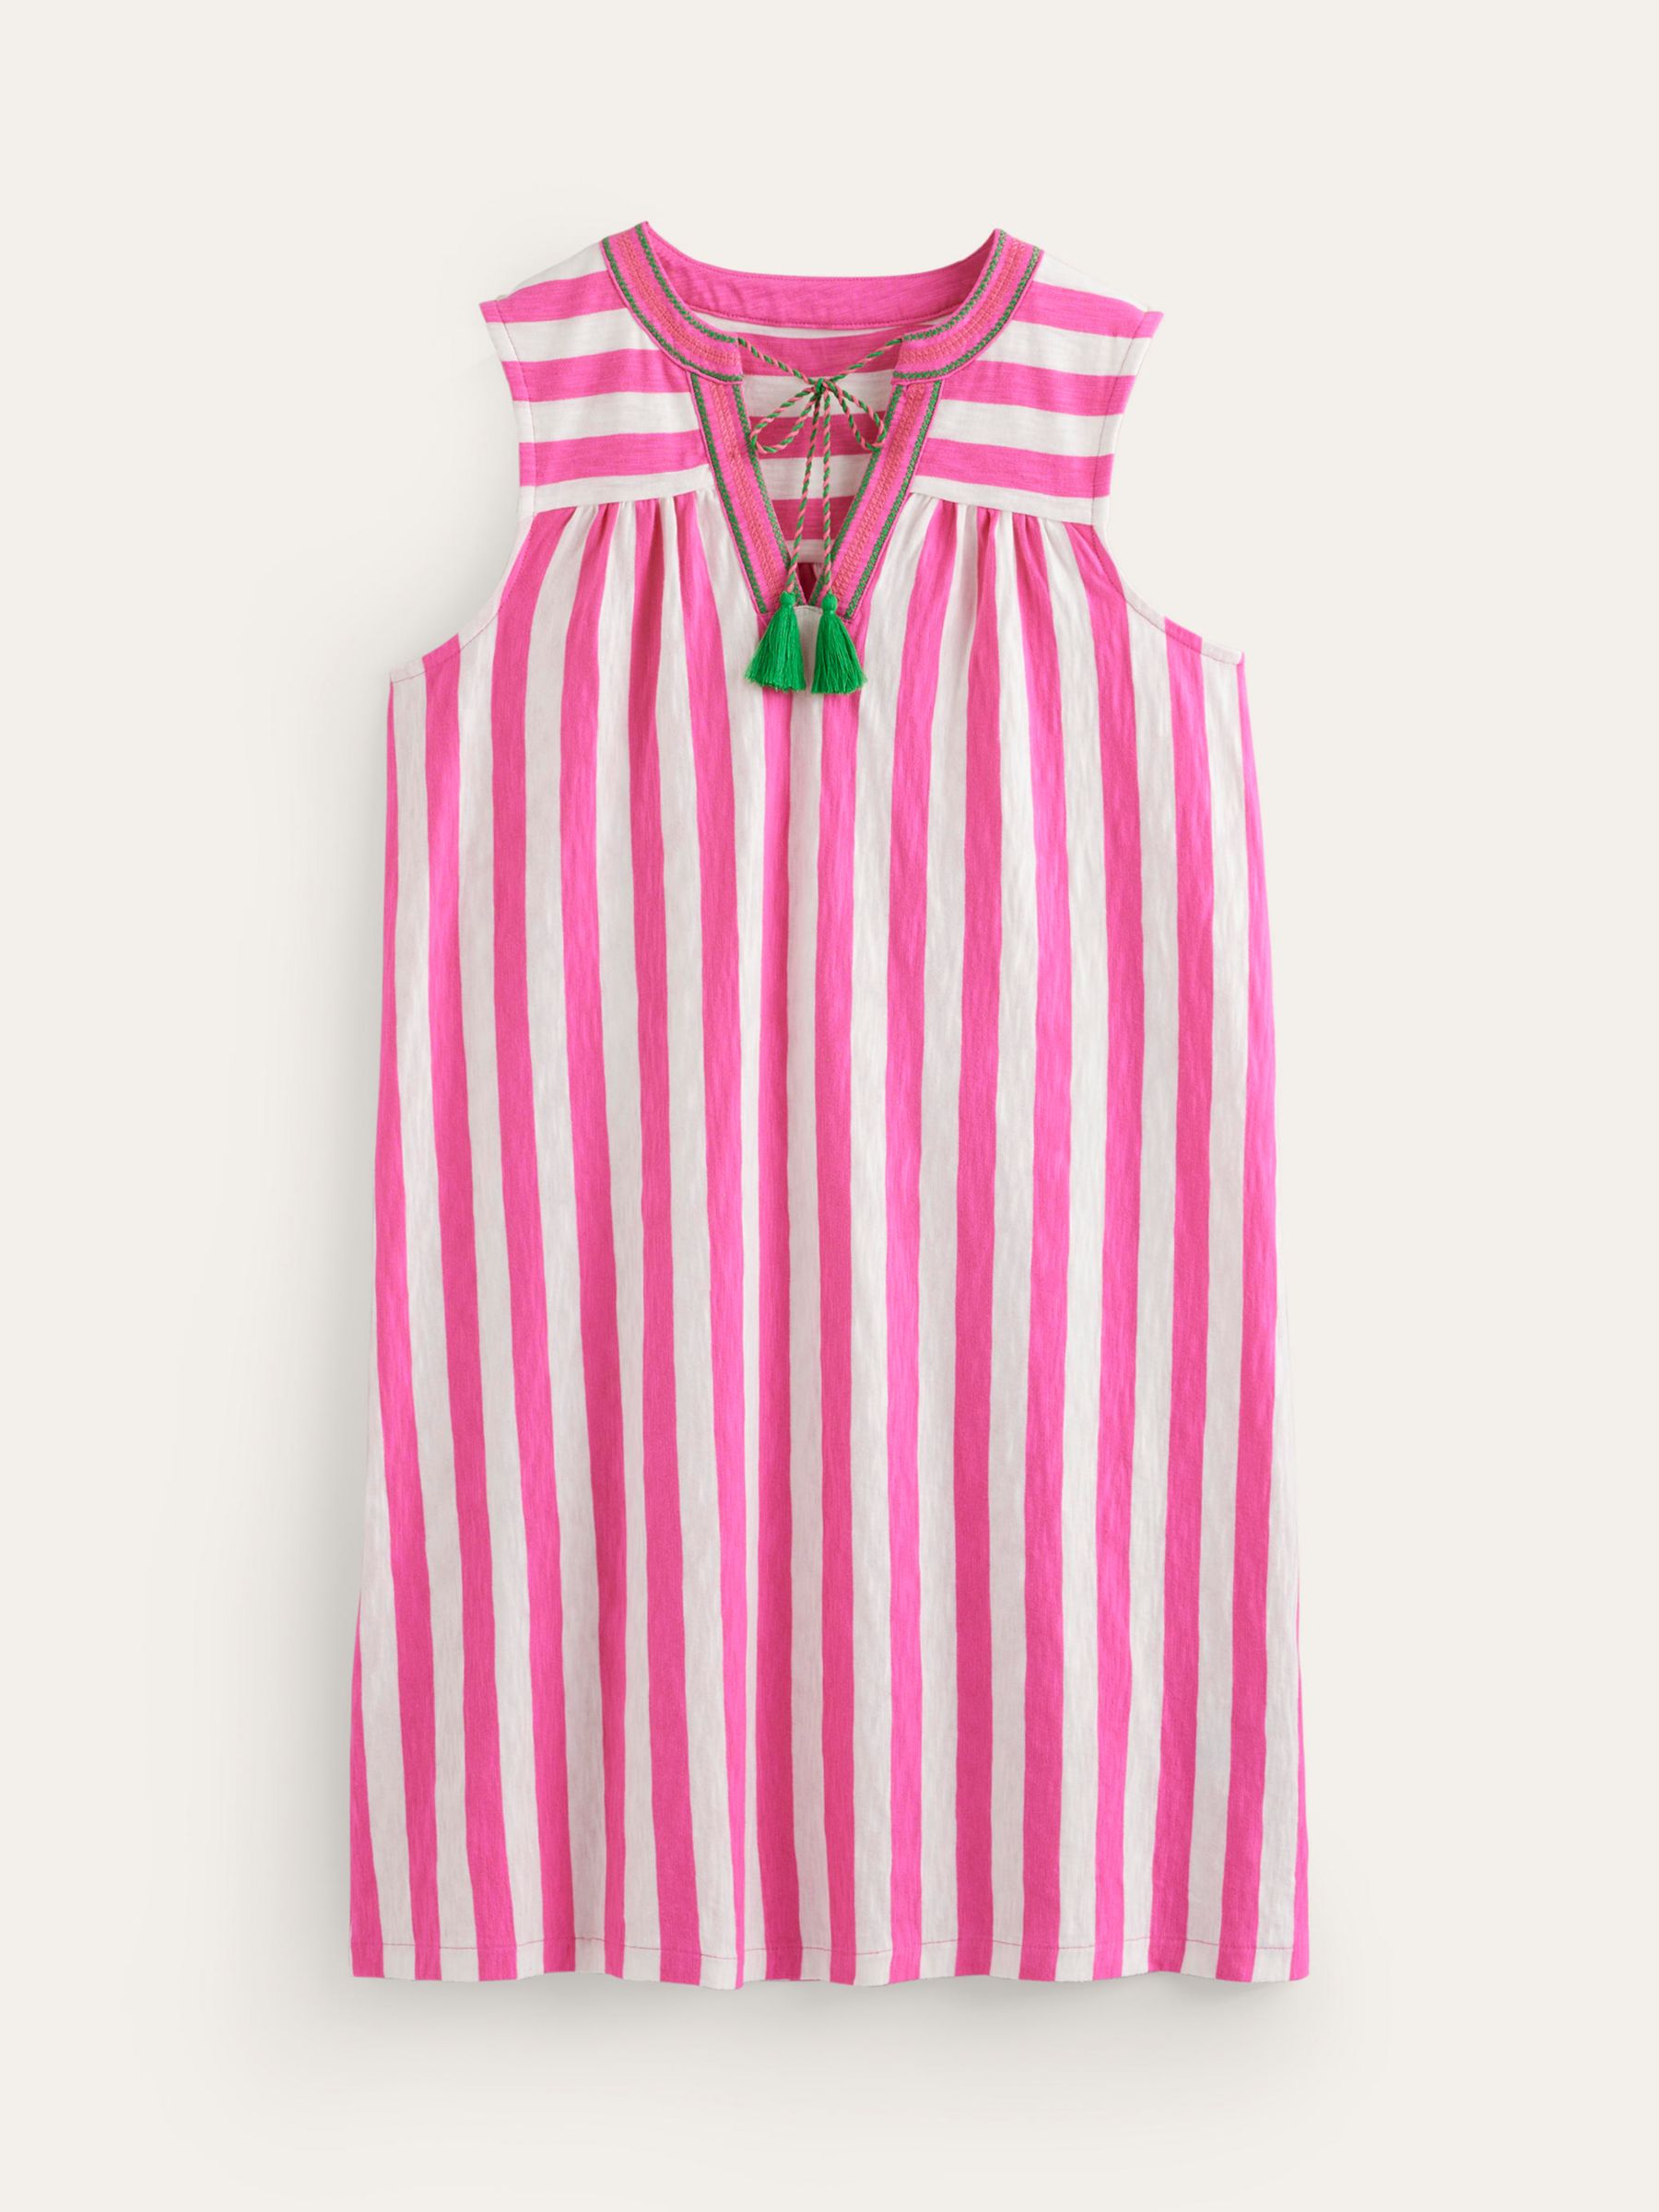 Boden Nadine Striped Cotton Relaxed Dress, Sangria/Ivory, 8